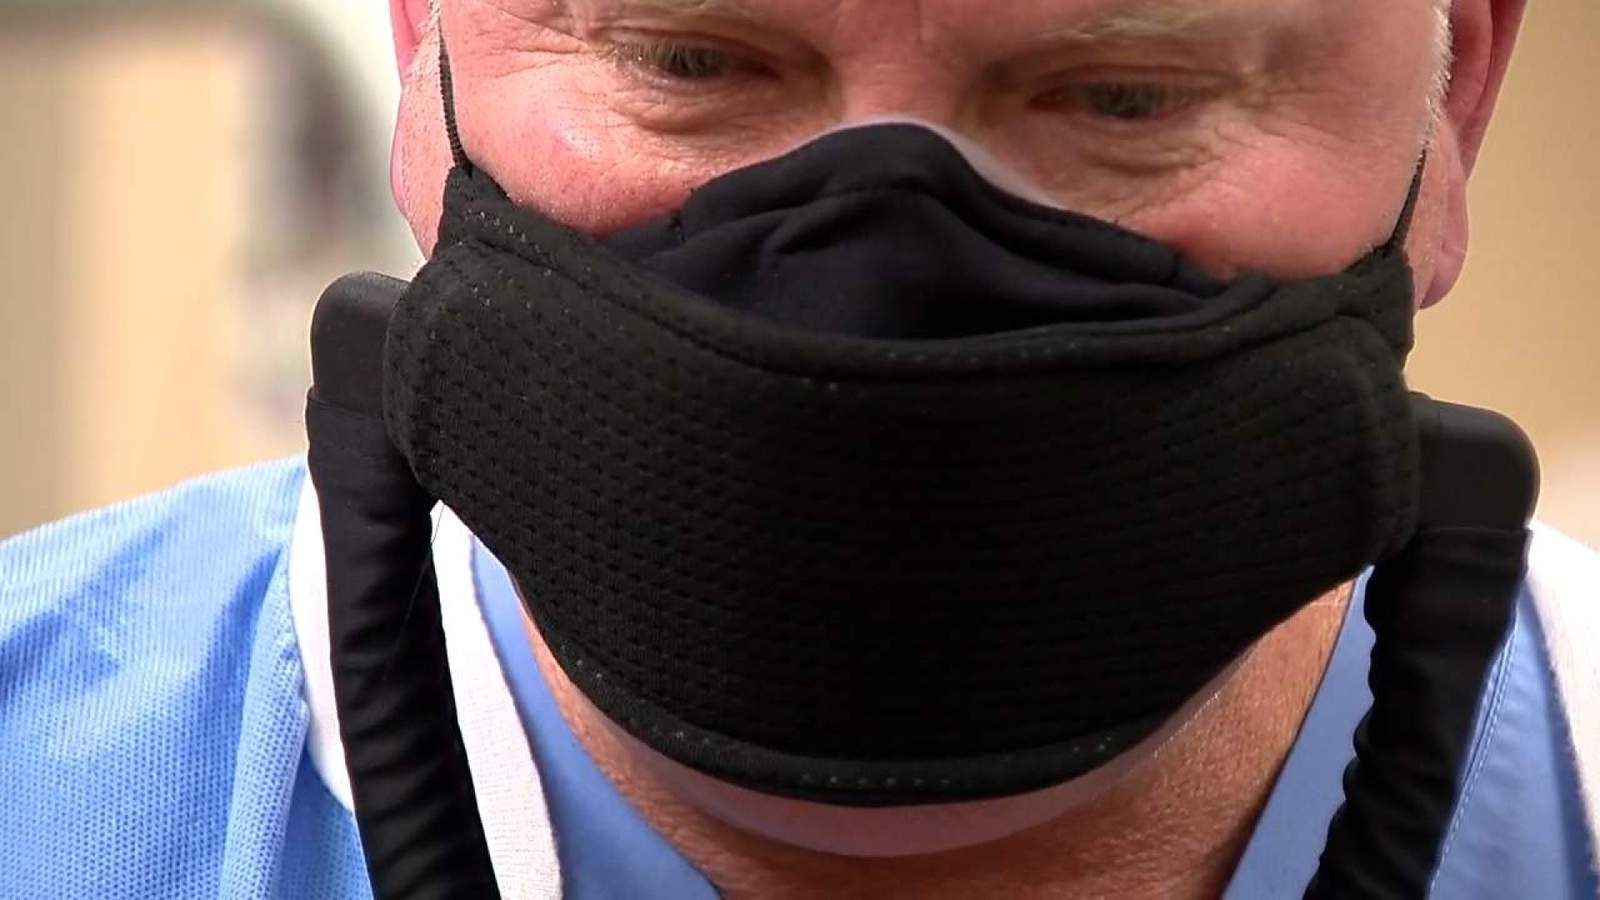 San Antonio startup creates jobs, peace of mind amid pandemic through special face masks